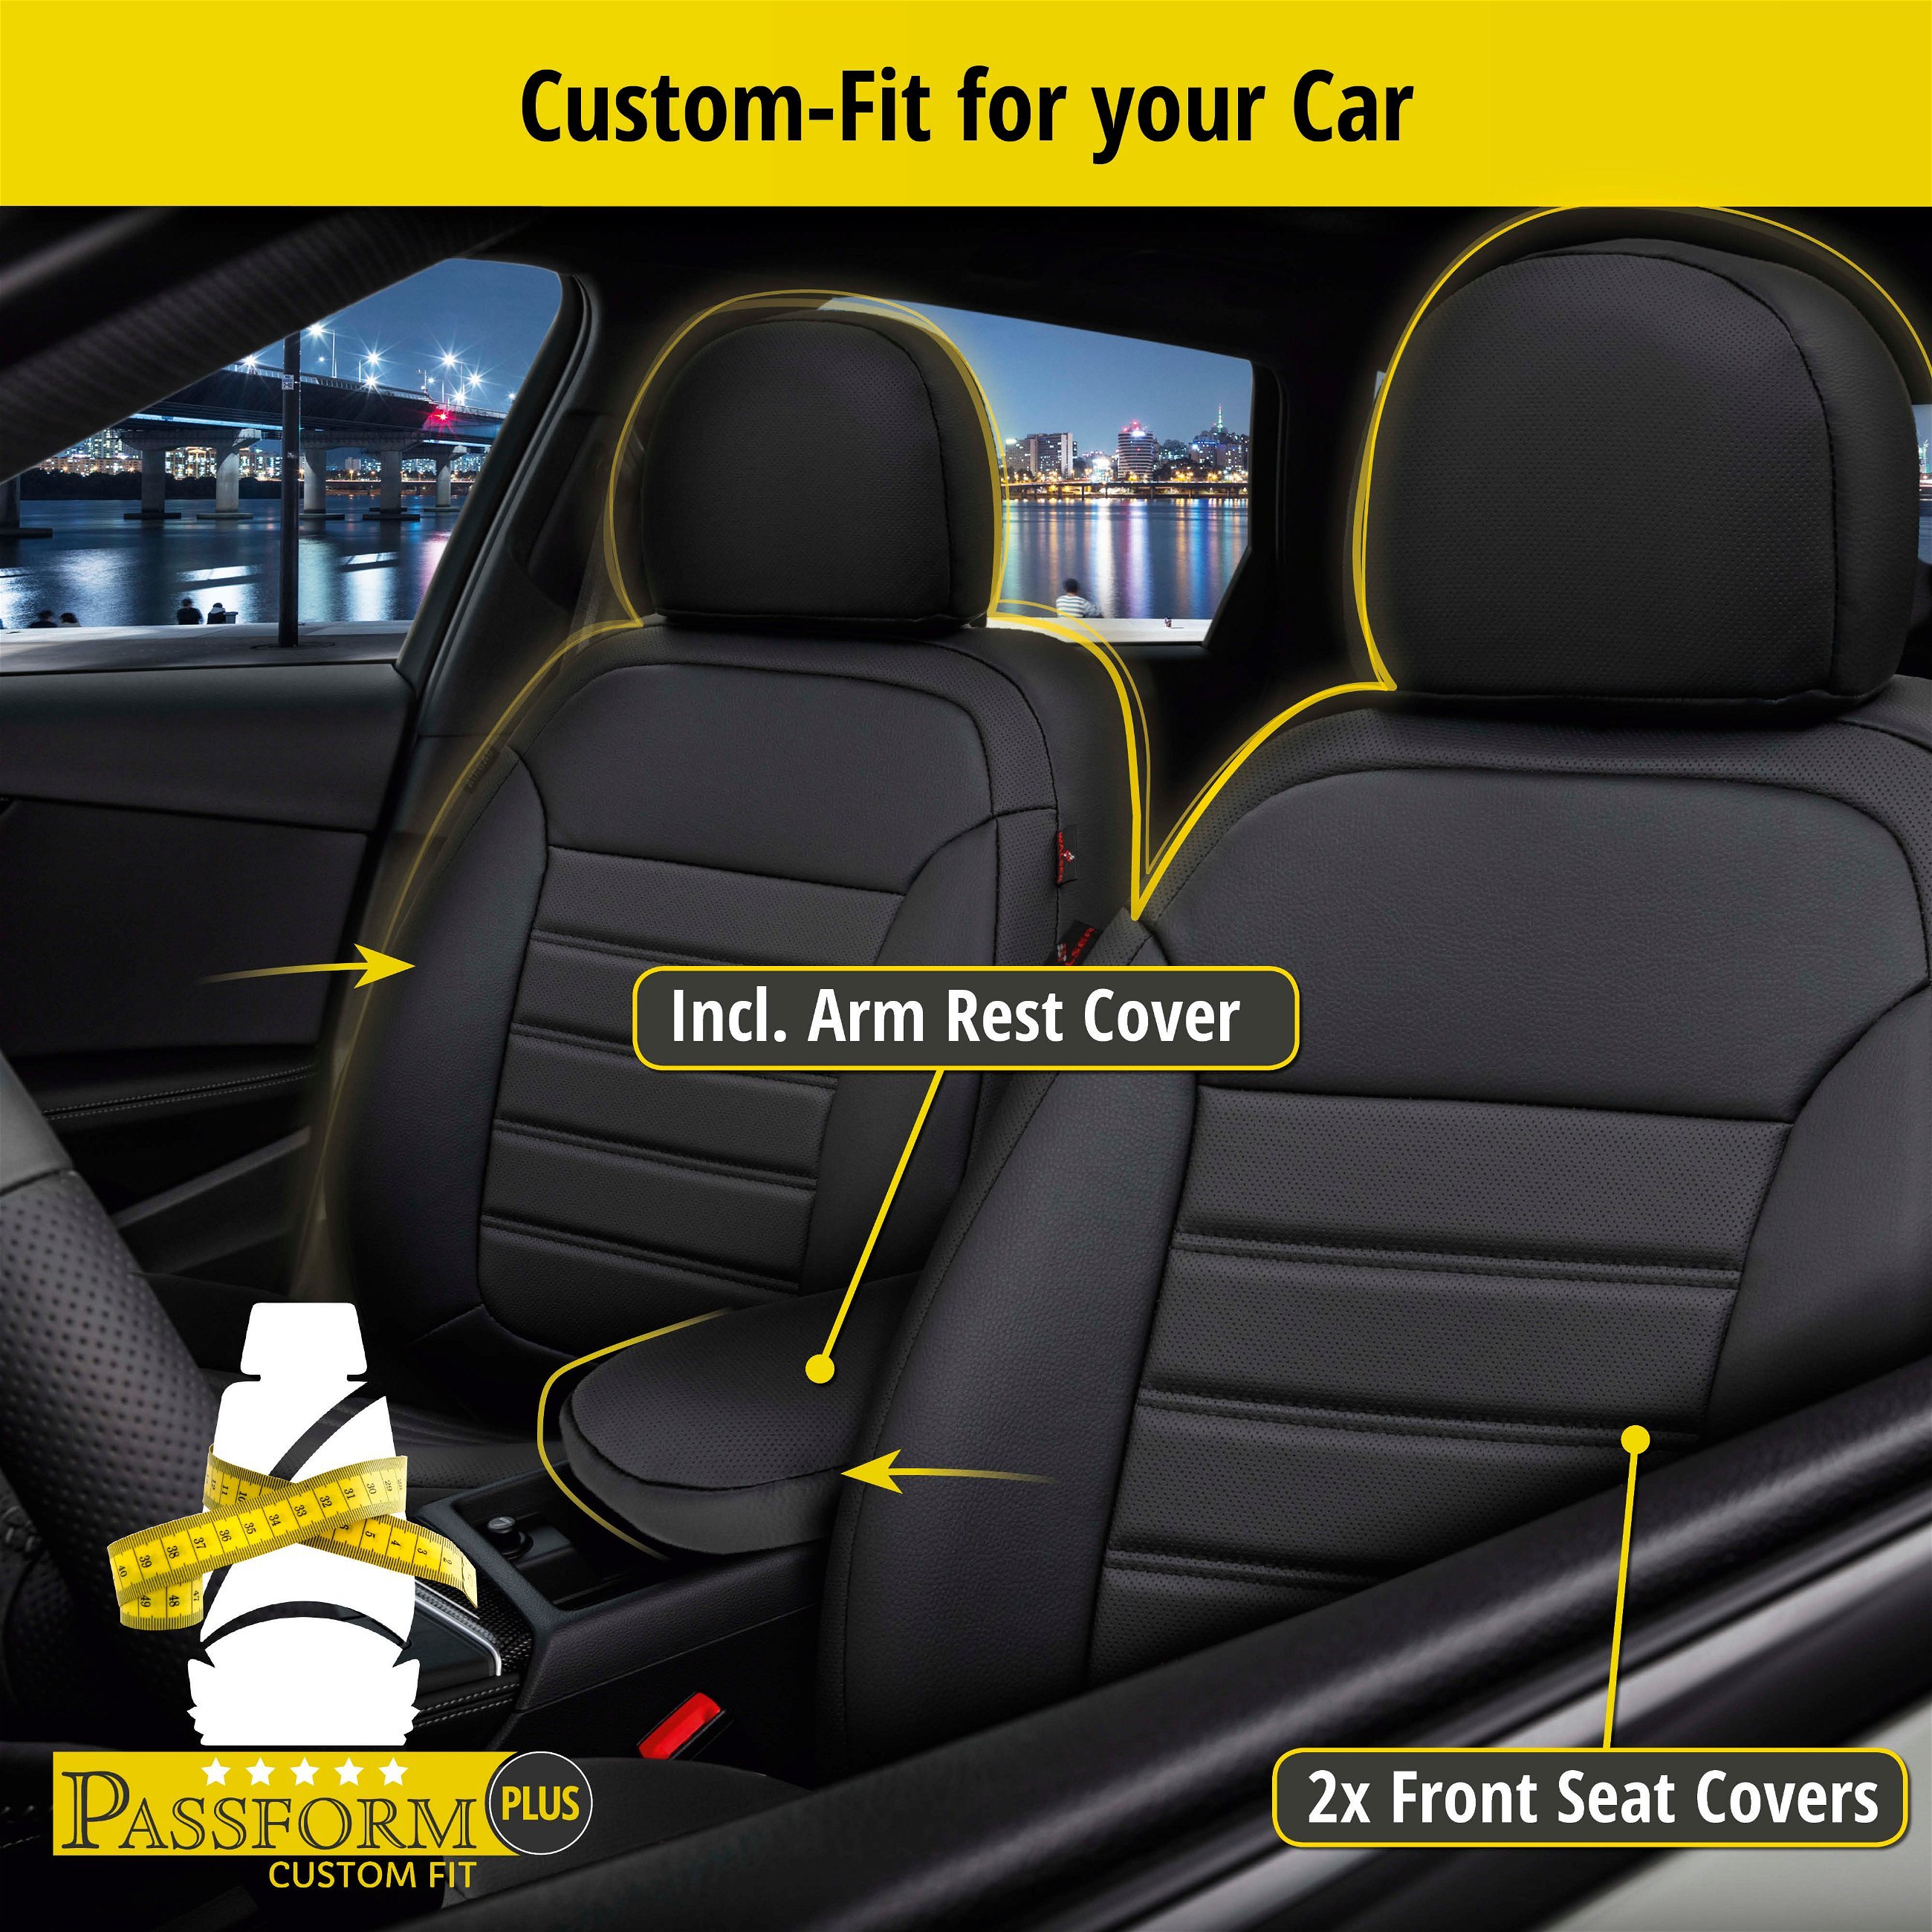 Seat Cover Robusto for Nissan Qashqai/Qashqai +2 I 12/2006-04/2014, 2 seat covers for normal seats